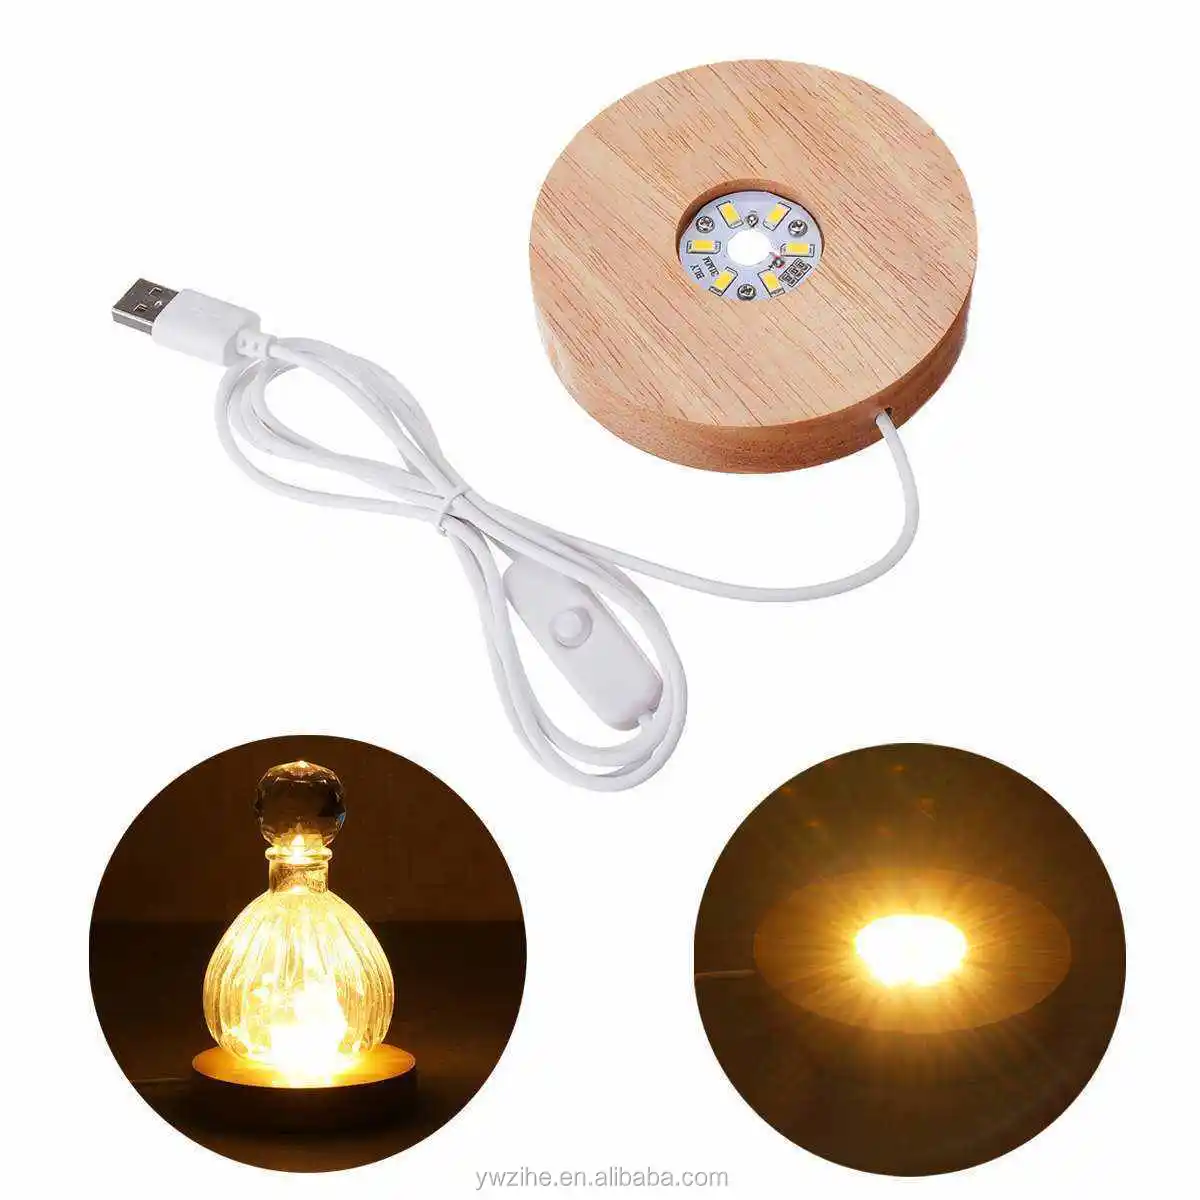 Light Base Rechargeable Wooden LED Light Rotating Display Stand Lamp Holders 